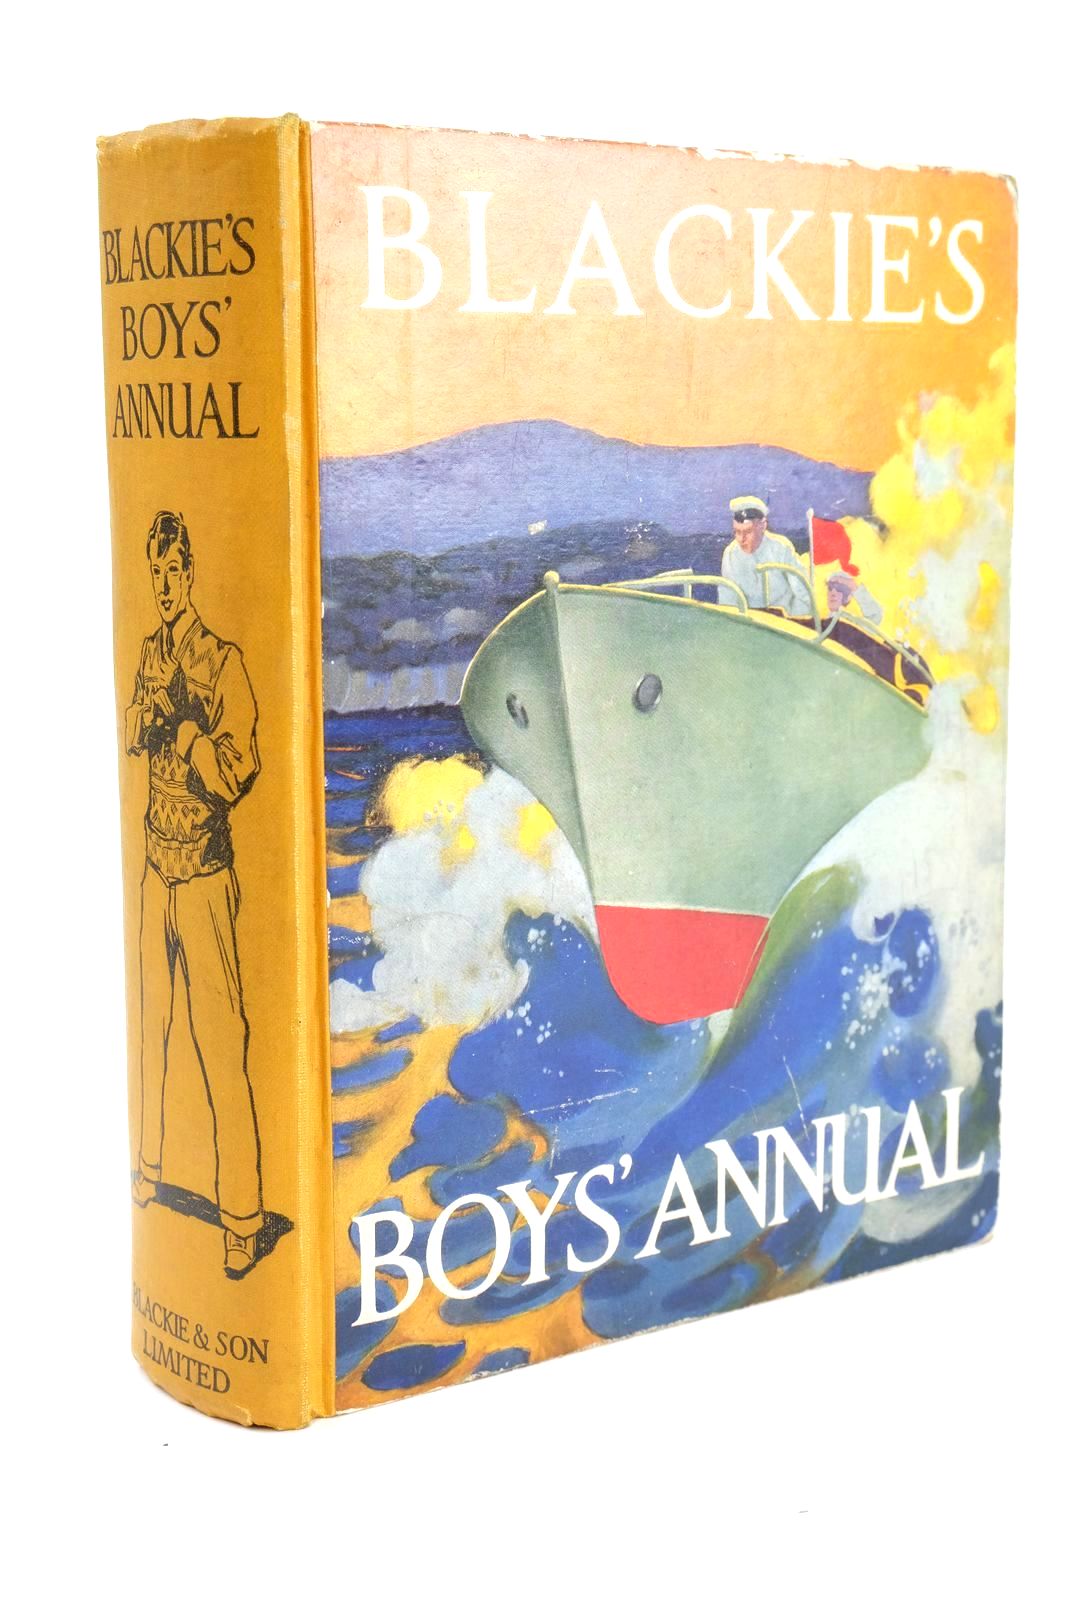 Photo of BLACKIE'S BOYS' ANNUAL written by Bird, Richard
Bridges, T.C. illustrated by Wightman, W.E.
Brock, H.M. published by Blackie & Son Ltd. (STOCK CODE: 1324781)  for sale by Stella & Rose's Books